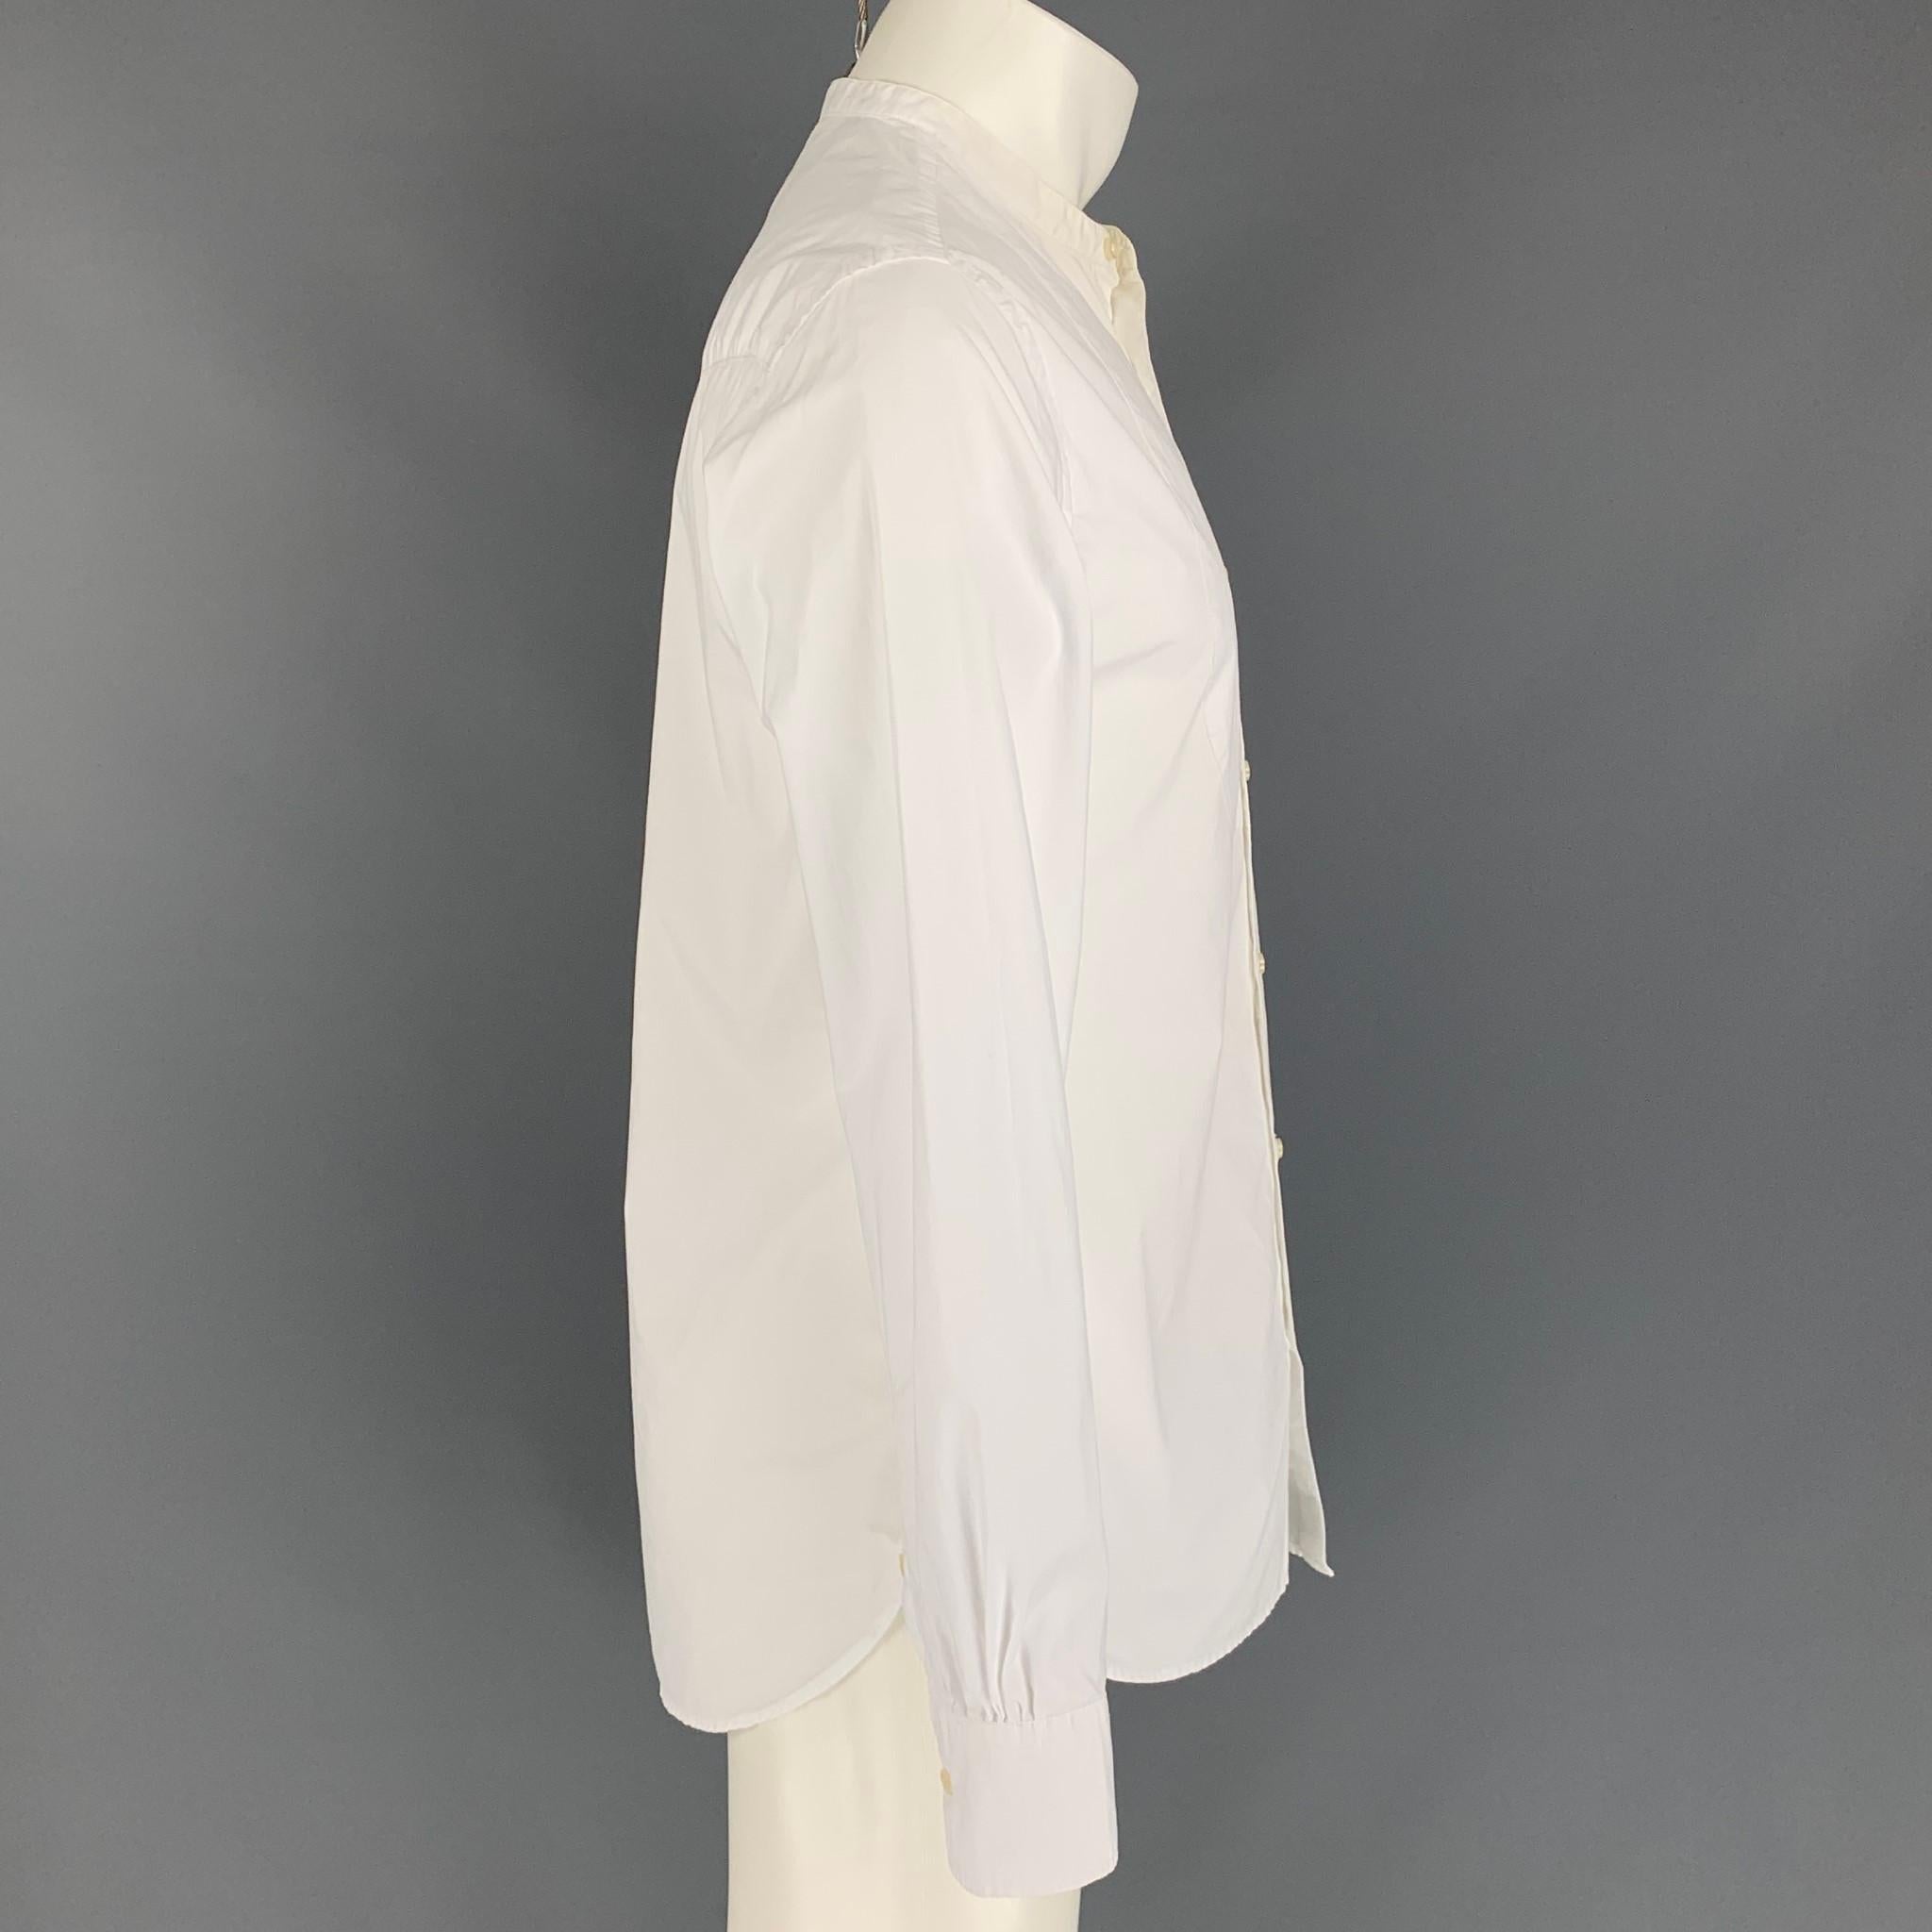 OFFICINE GENERALE x BARNEY'S NEW YORK long sleeve shirt comes in a white cotton featuring a nehru collar and a buttoned closure. Made in Portugal.

Very Good Pre-Owned Condition.
Marked: M

Measurements:

Shoulder: 17 in.
Chest: 40 in.
Sleeve: 25.5